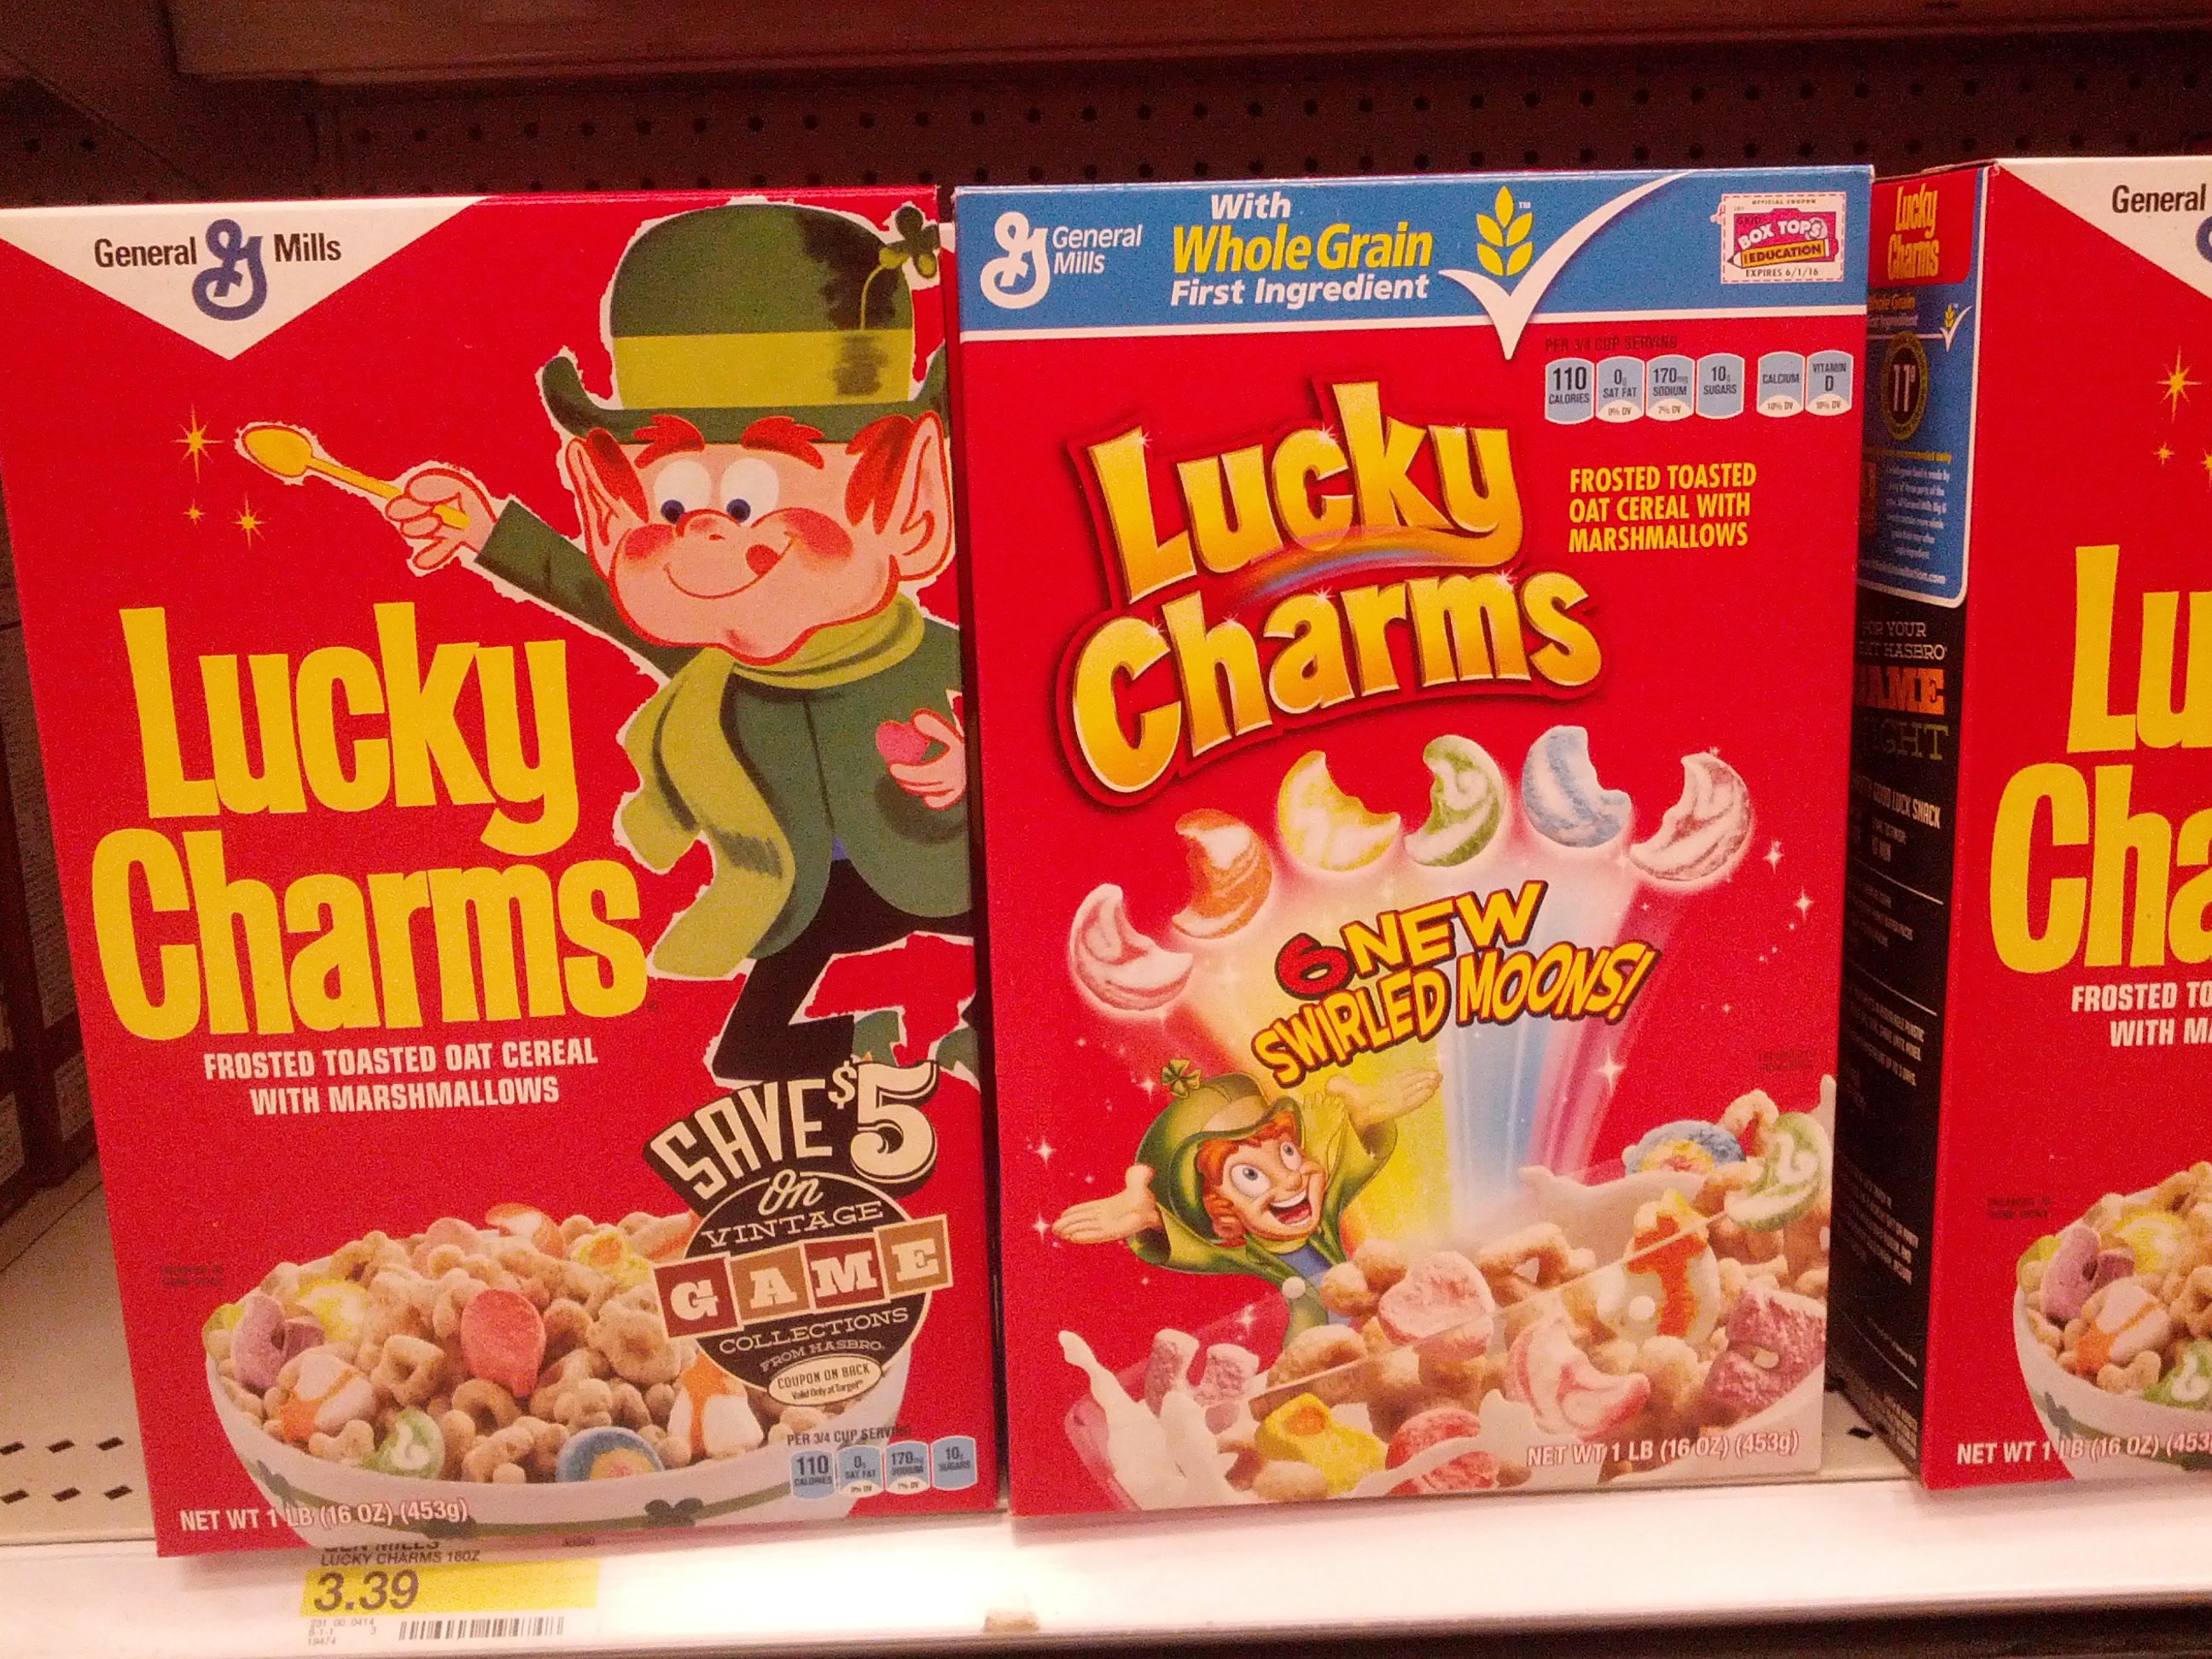 lucky charms cereal box retro